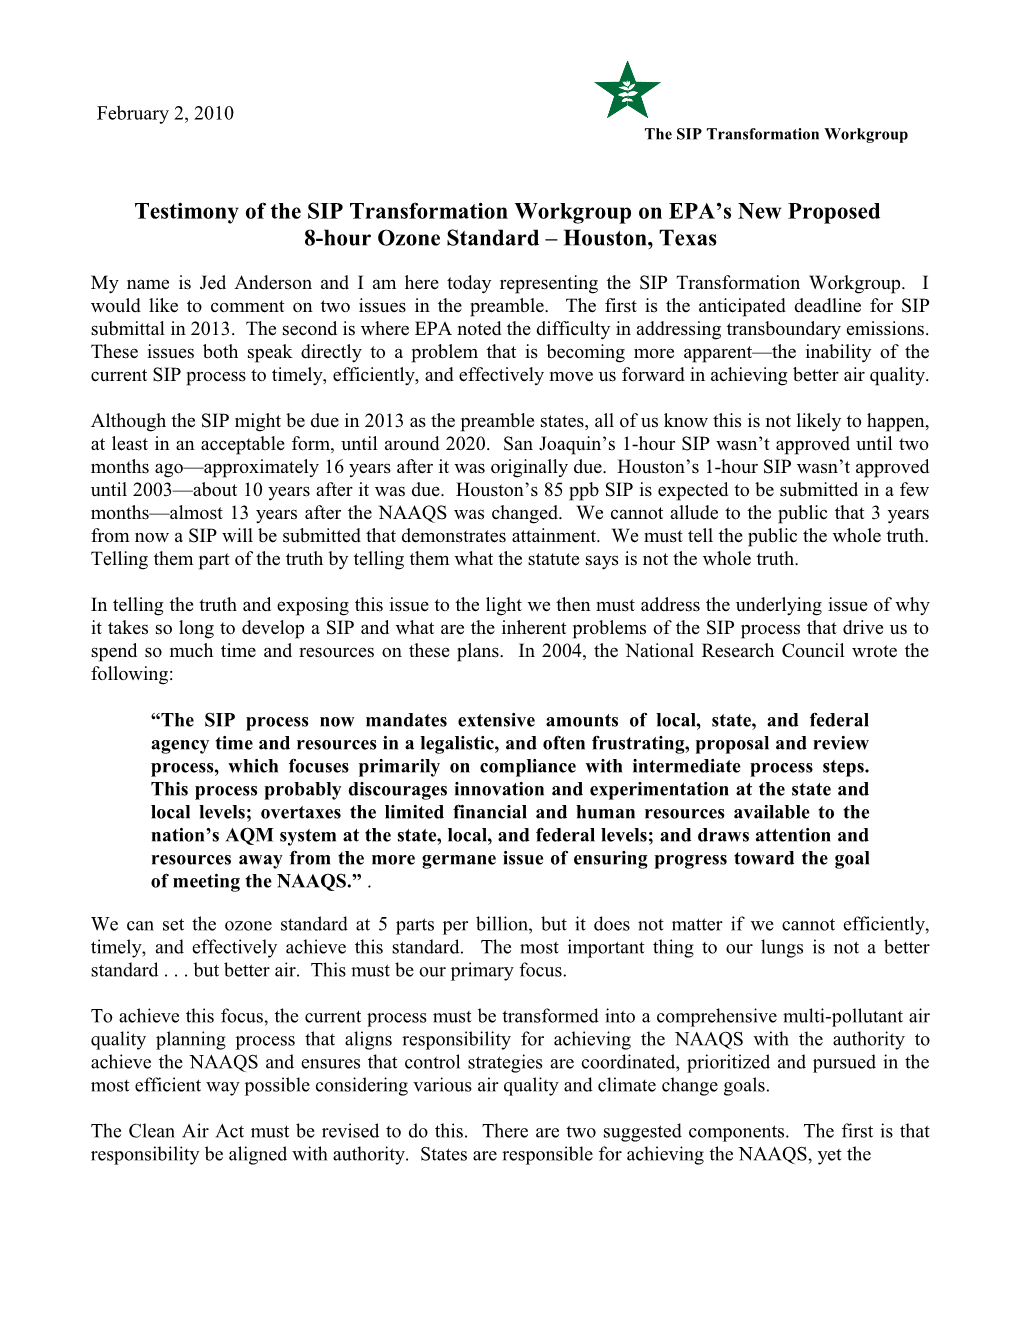 The SIP Transformation Workgroup